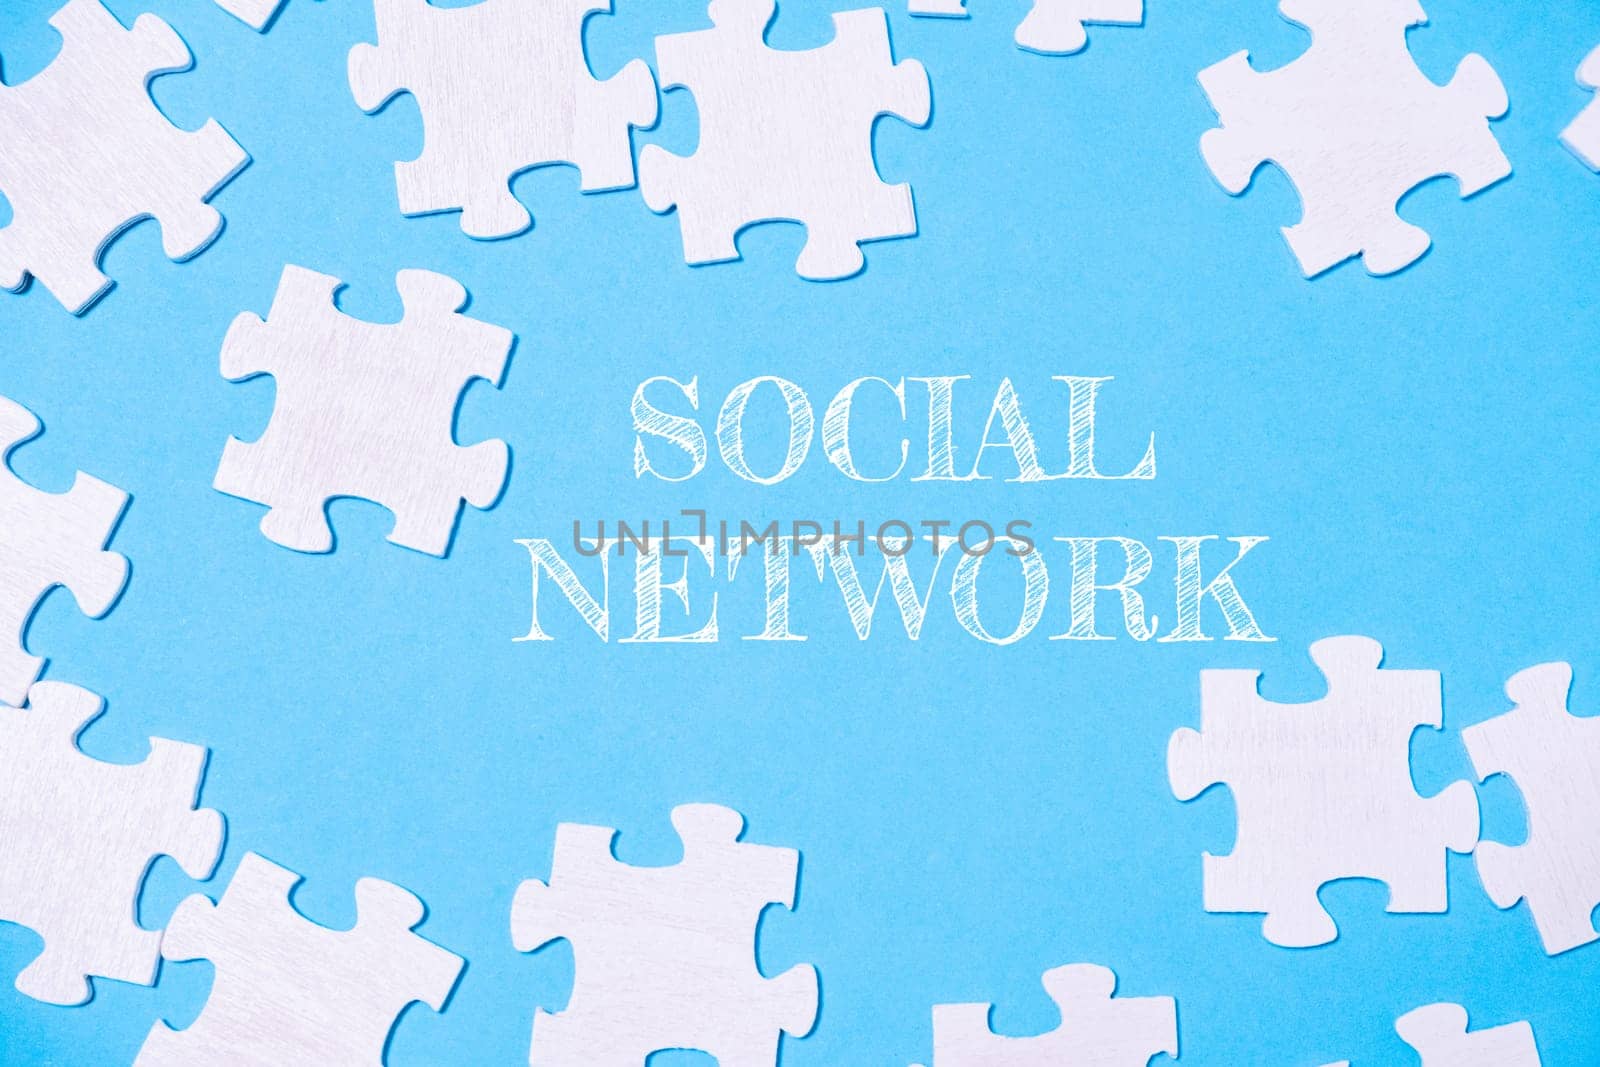 A jigsaw puzzle with the word social network written on it. The puzzle pieces are scattered across the image, creating a sense of disarray and complexity. The blue background adds a calming